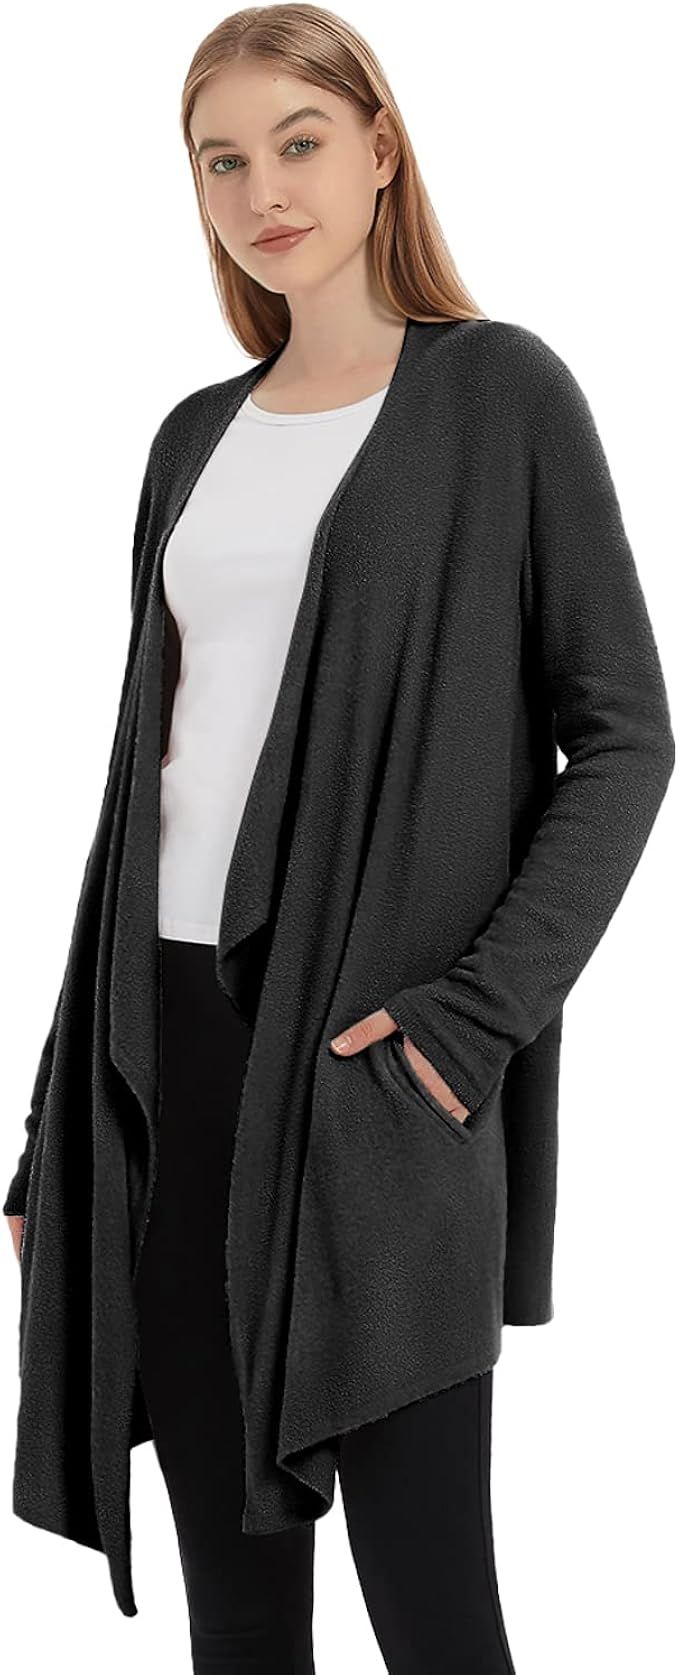 Womens-Open-Front-Cardigan Long-Sleeve Knit-Sweater Cozy-Coatigan - Lightweight with Pockets Coat | Amazon (US)